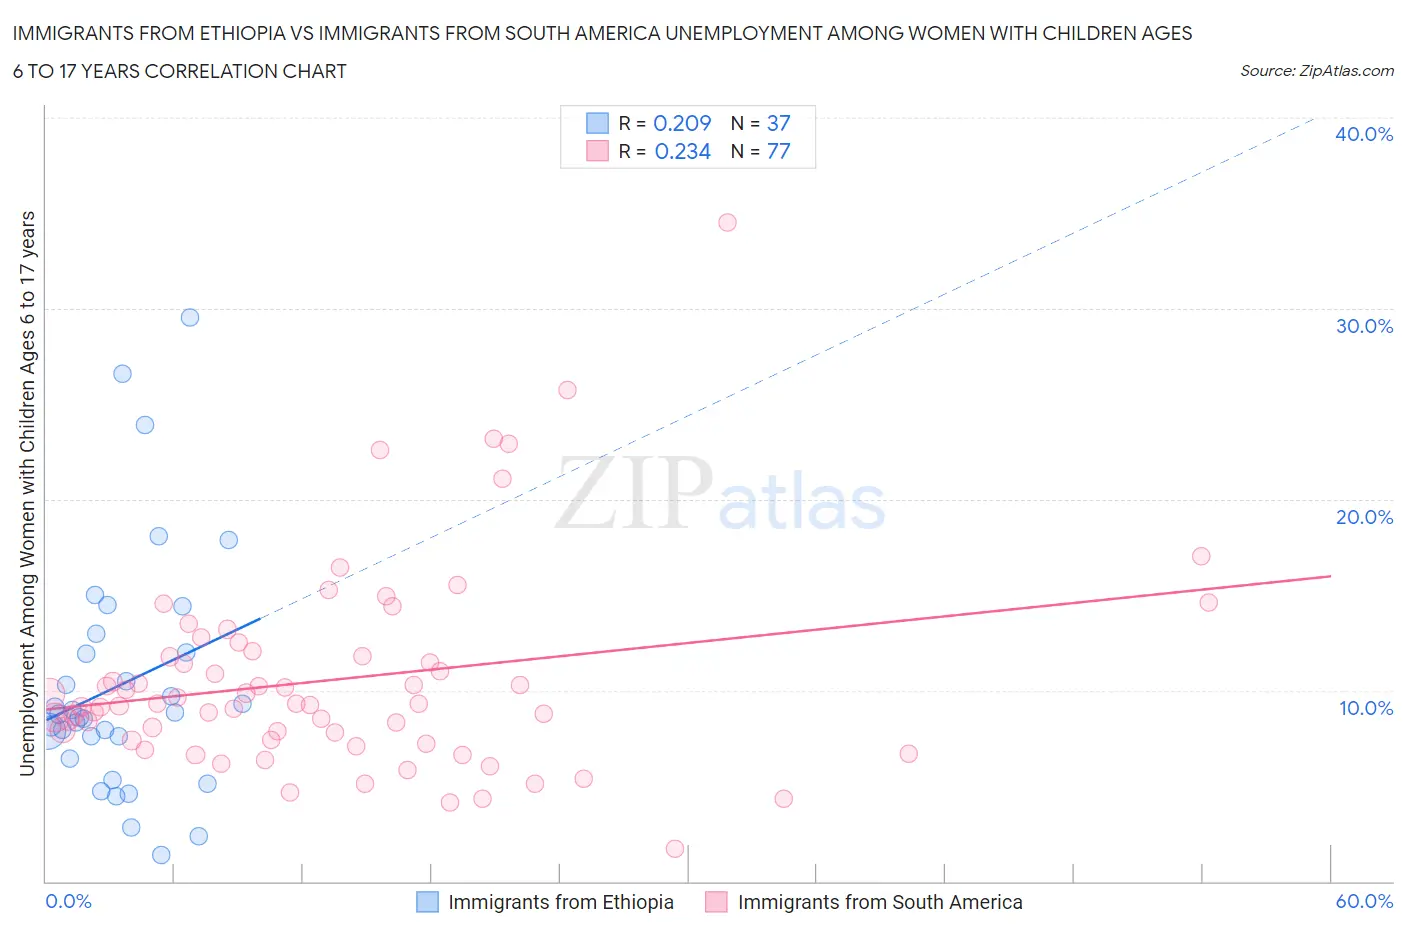 Immigrants from Ethiopia vs Immigrants from South America Unemployment Among Women with Children Ages 6 to 17 years